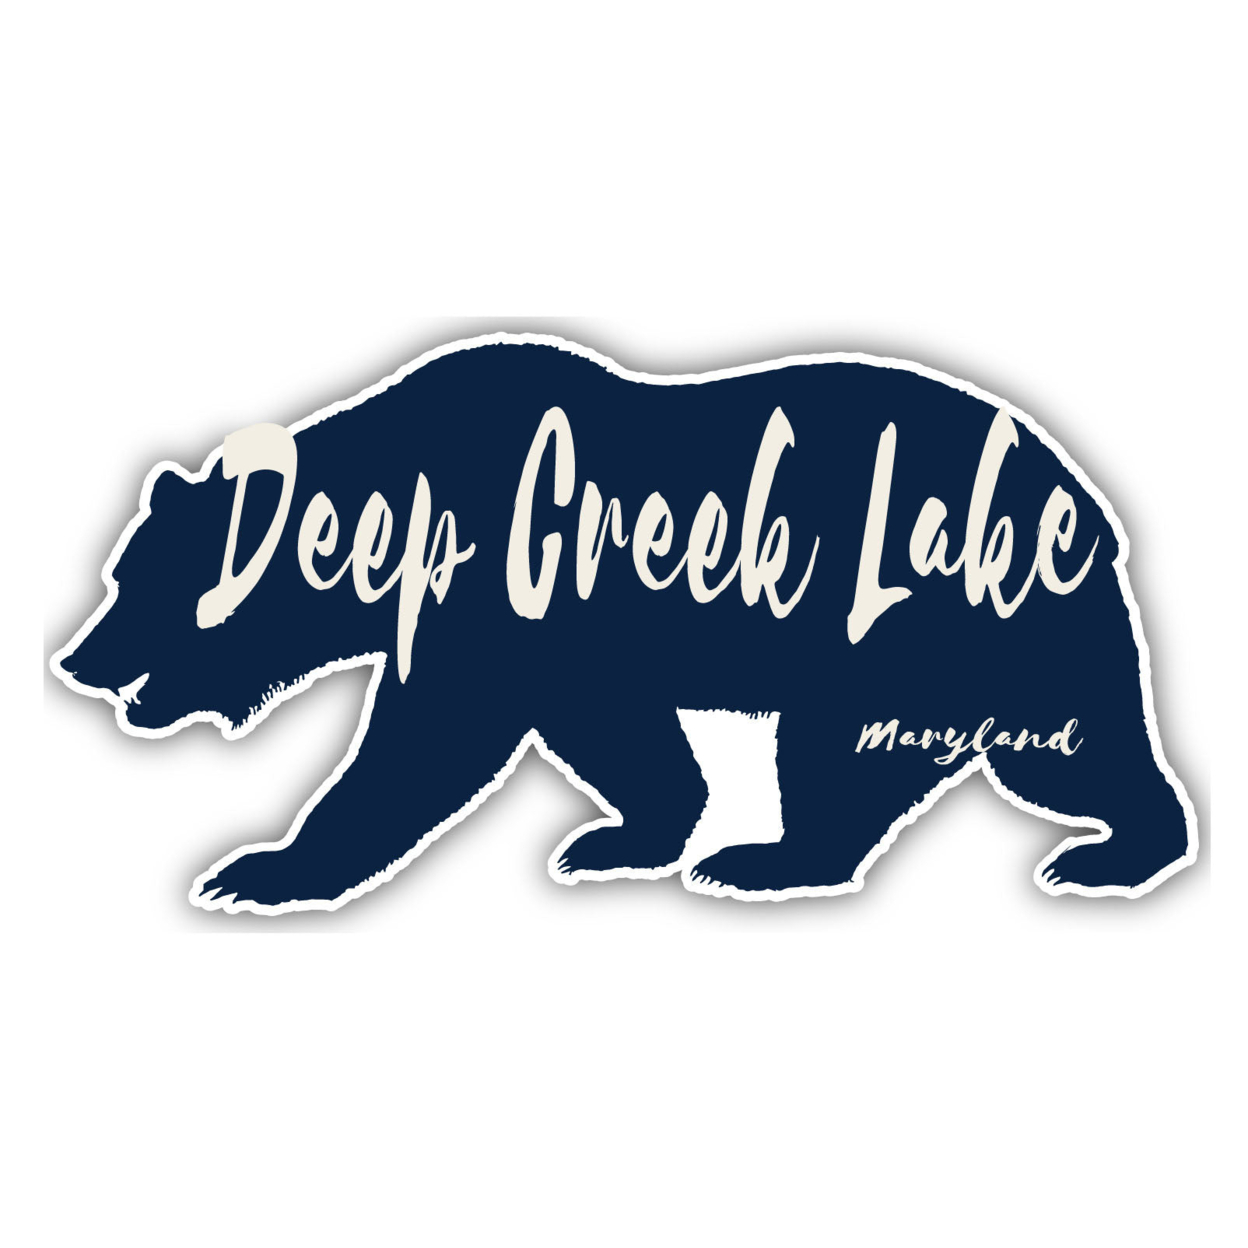 Deep Creek Lake Maryland Souvenir Decorative Stickers (Choose Theme And Size) - 4-Pack, 10-Inch, Bear